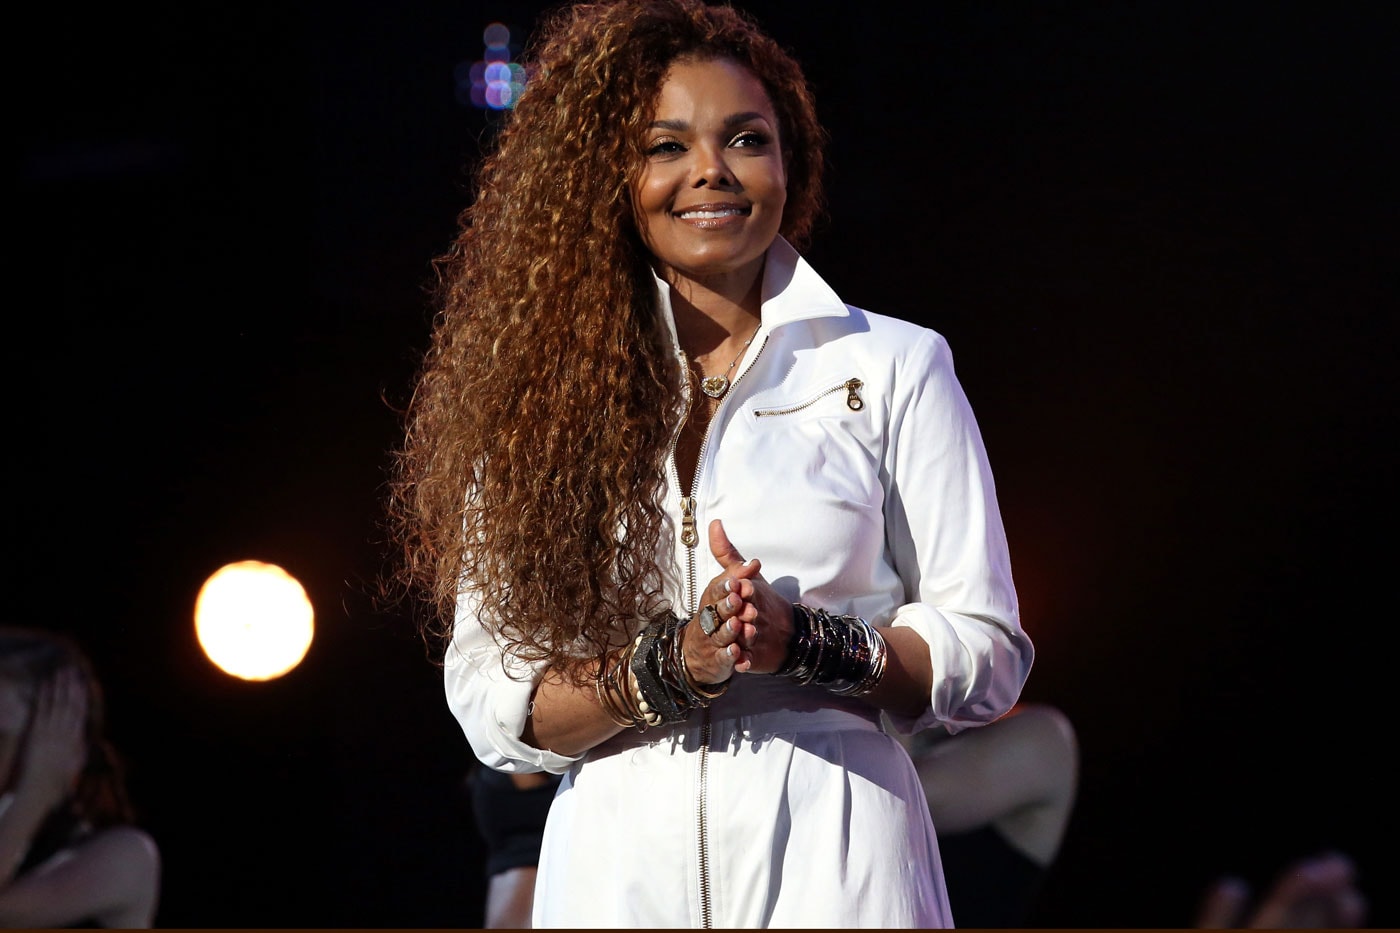 Janet Jackson Tributes Aaliyah on 14th Anniversary of Singer's Death